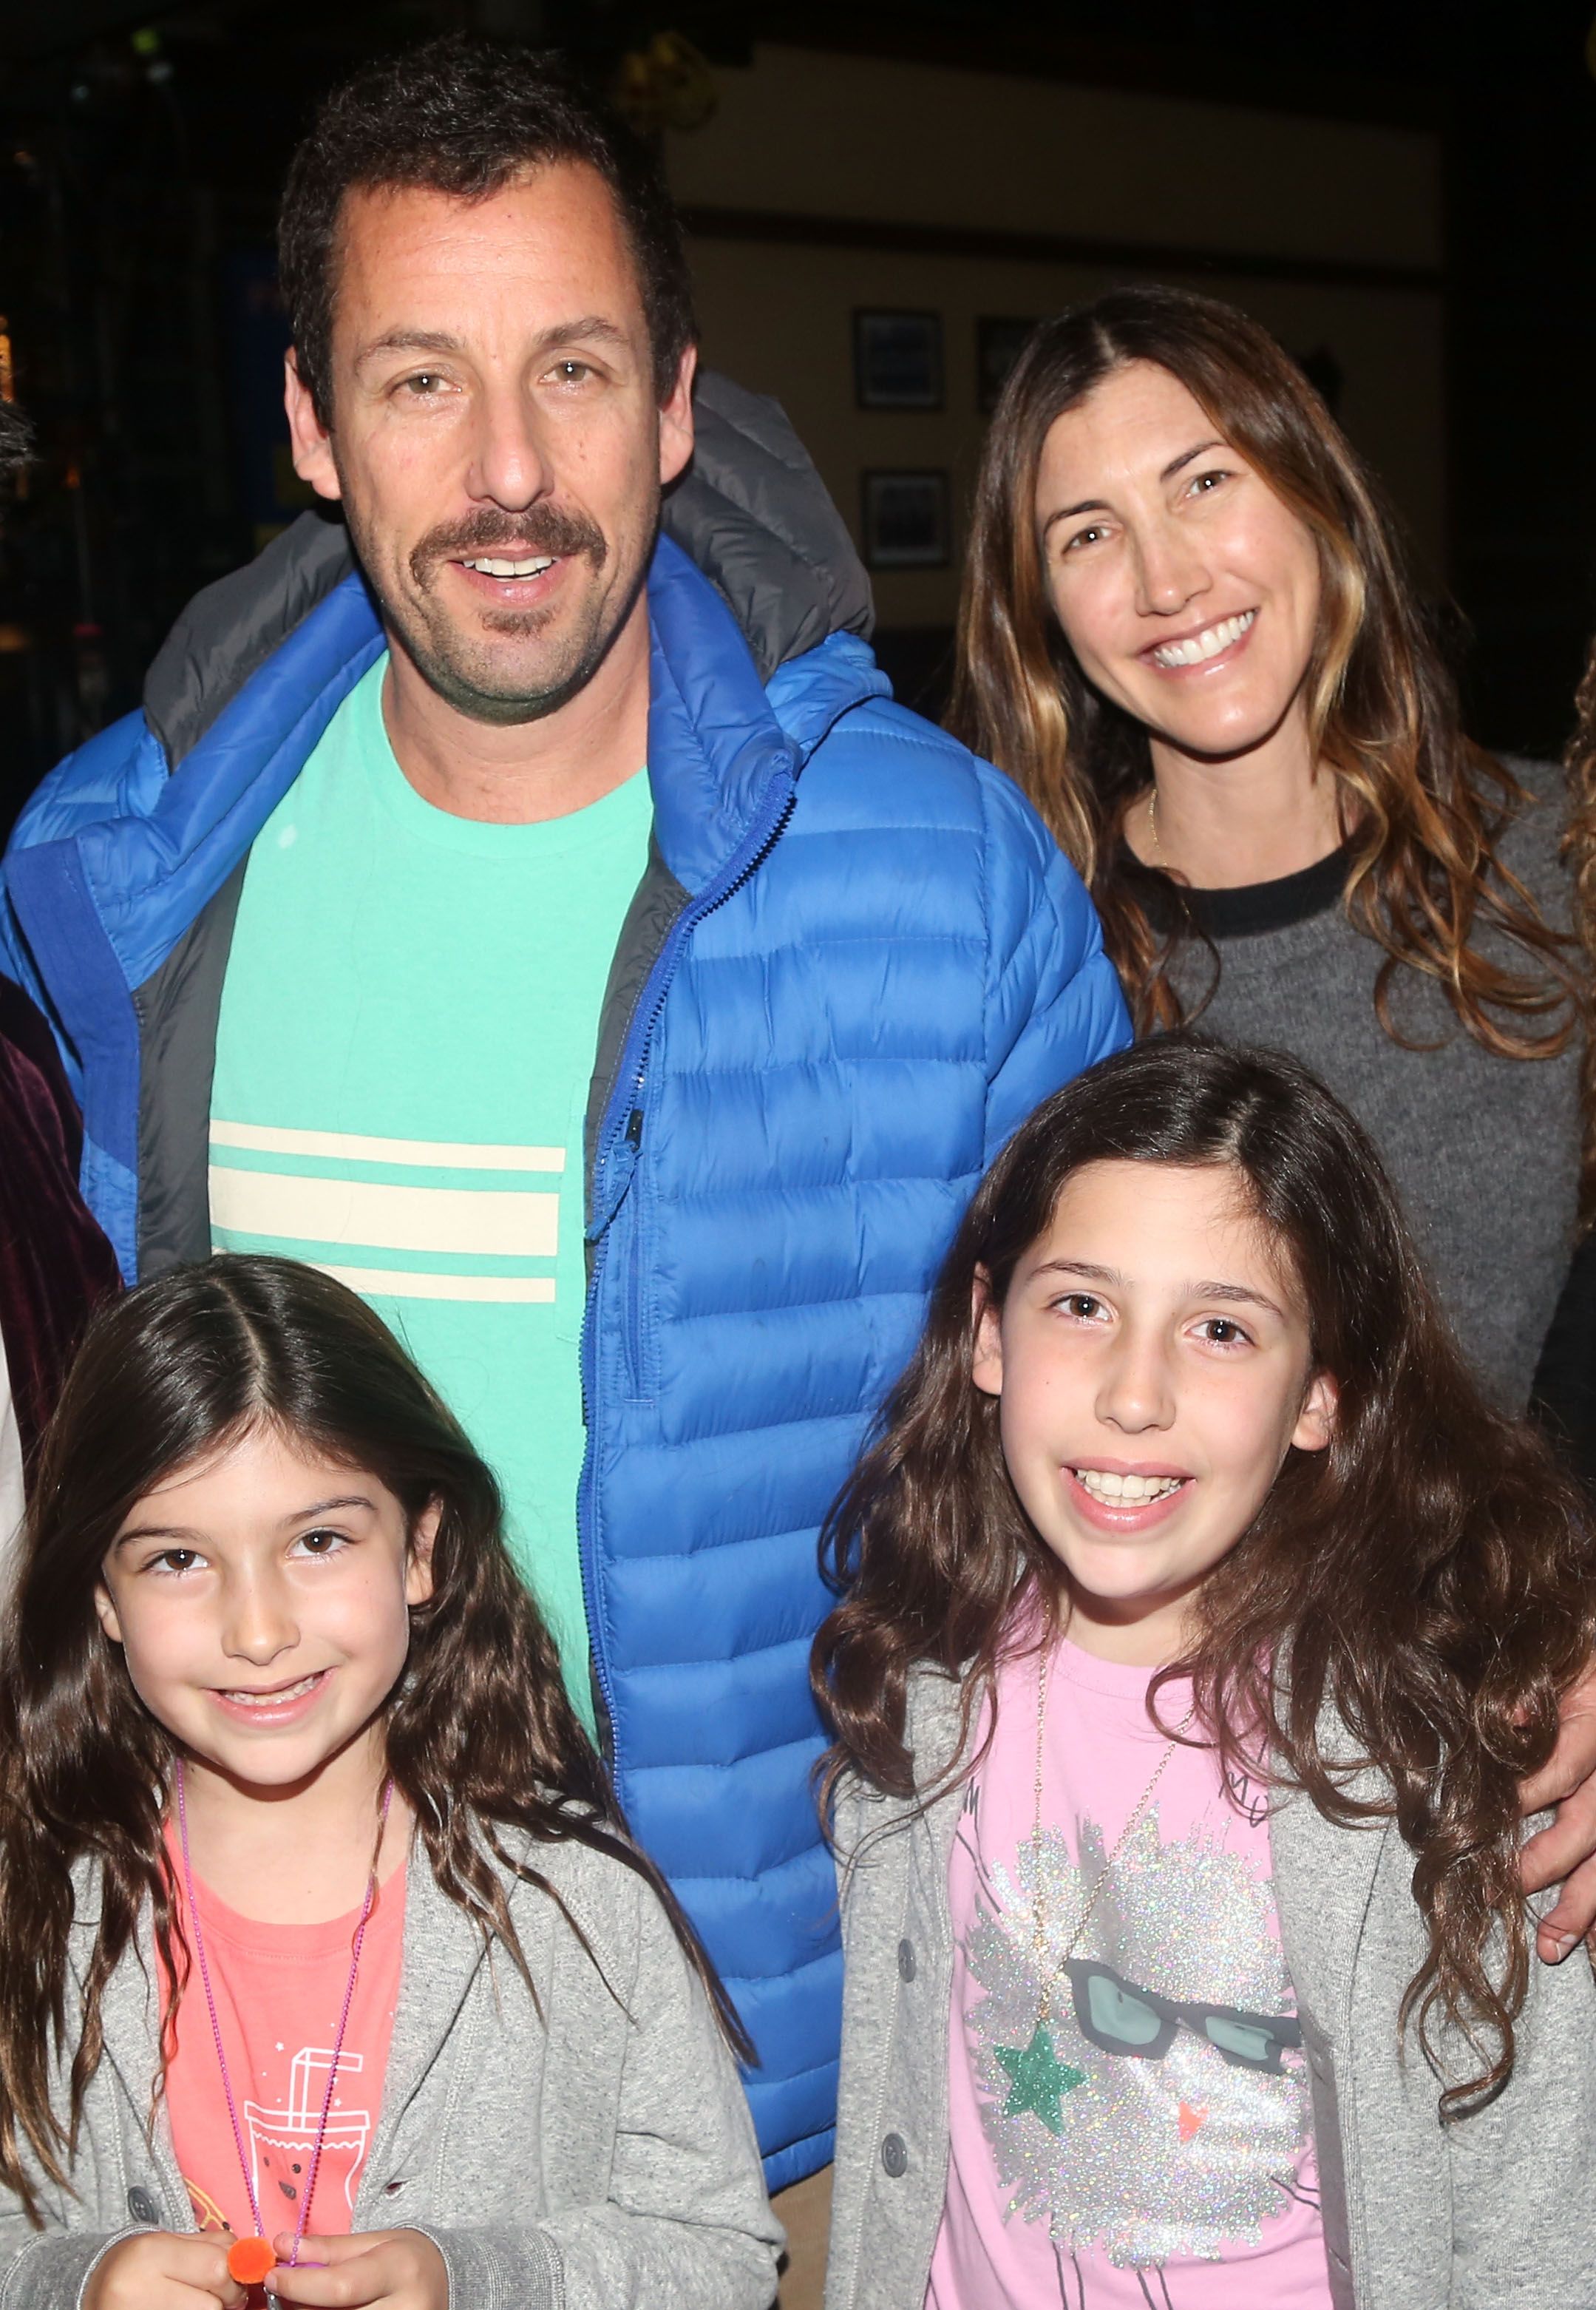 Adam Sandlers Kids Are Not Fans of His Movies пїЅ What to Know about ... photo